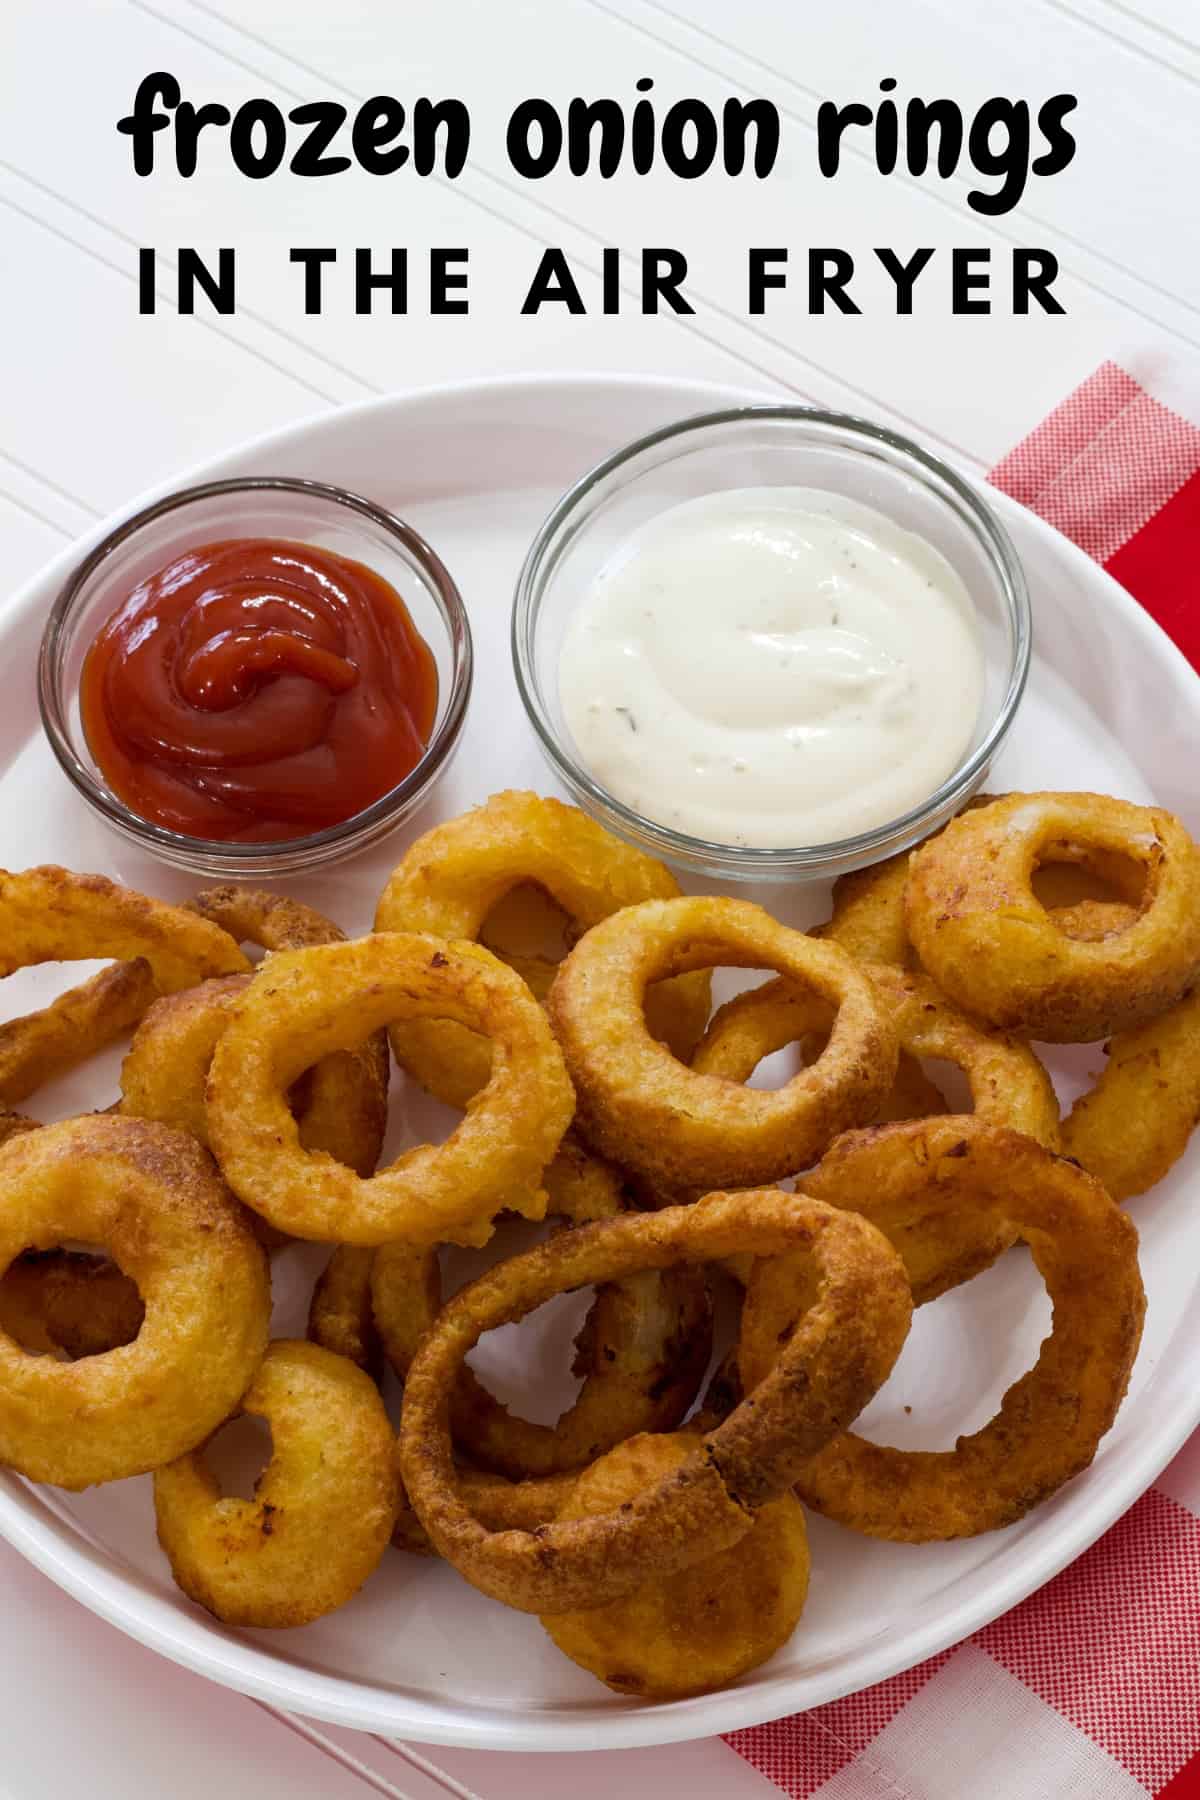 https://www.mindyscookingobsession.com/wp-content/uploads/2023/02/frozen-onion-rings-in-the-air-fryer-1.jpg